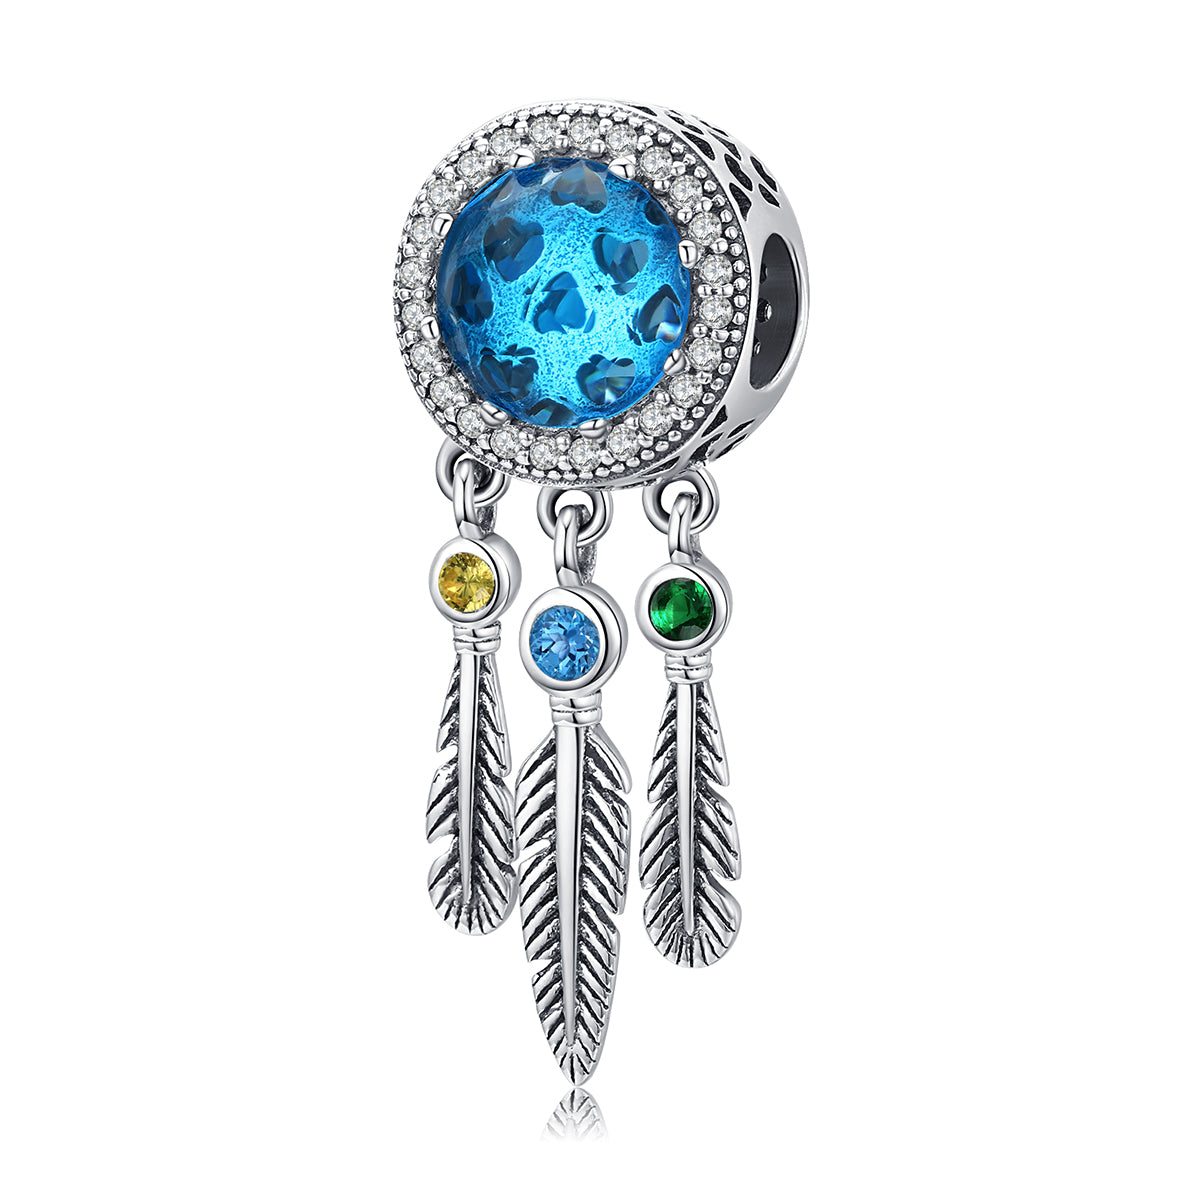 Dream Catcher Pendant or Charm with CZ - Sterling Silver 925 - NEW622